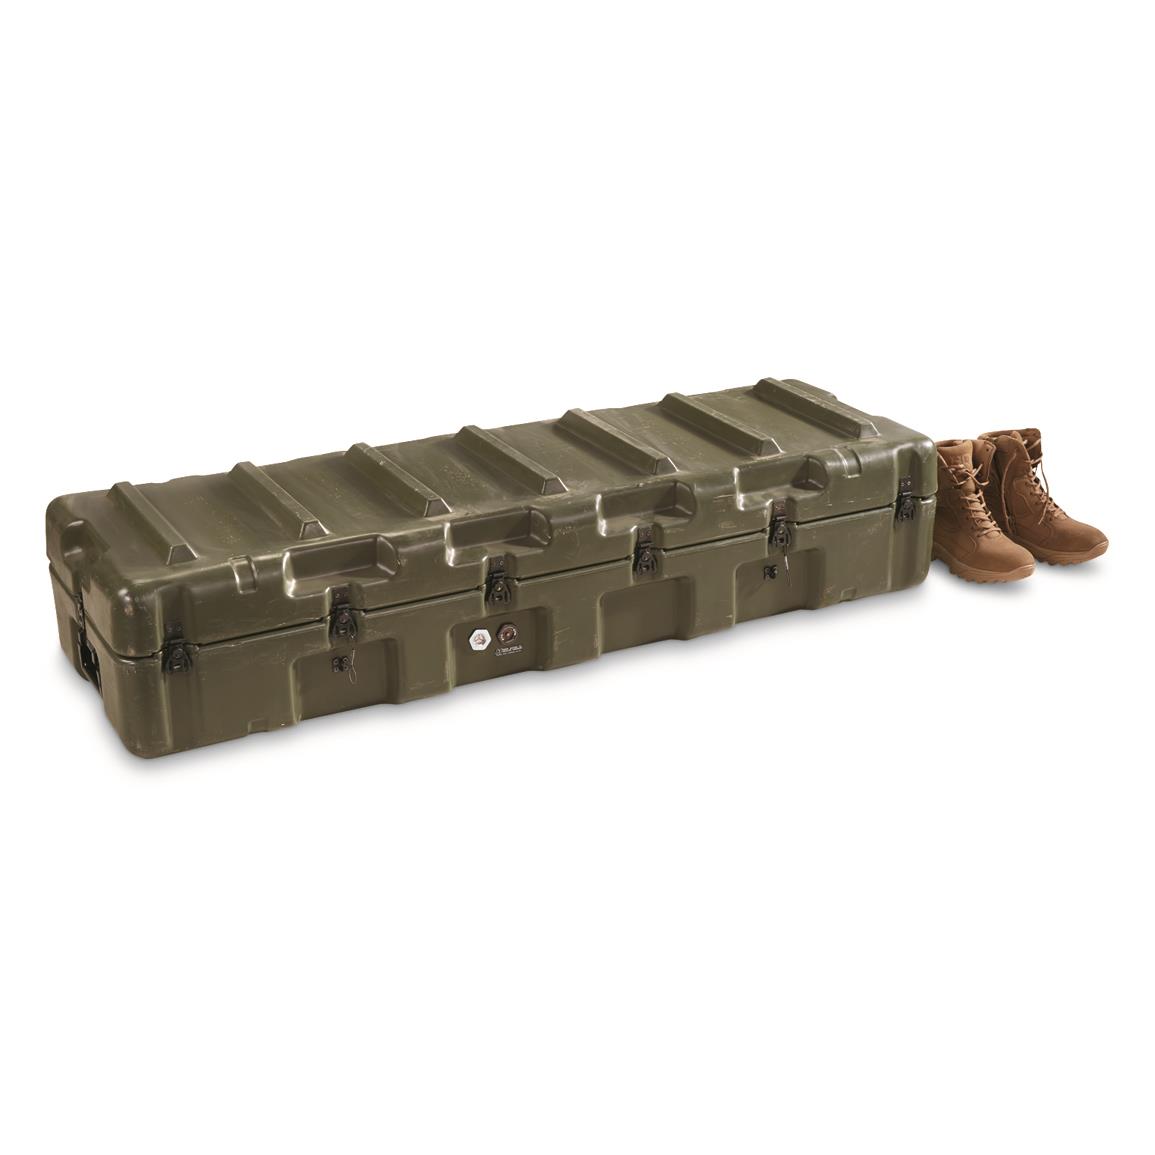 U.s. Military Surplus Hardigg Long Gun Case, Used - 681105, Storage Containers At Sportsman'S Guide